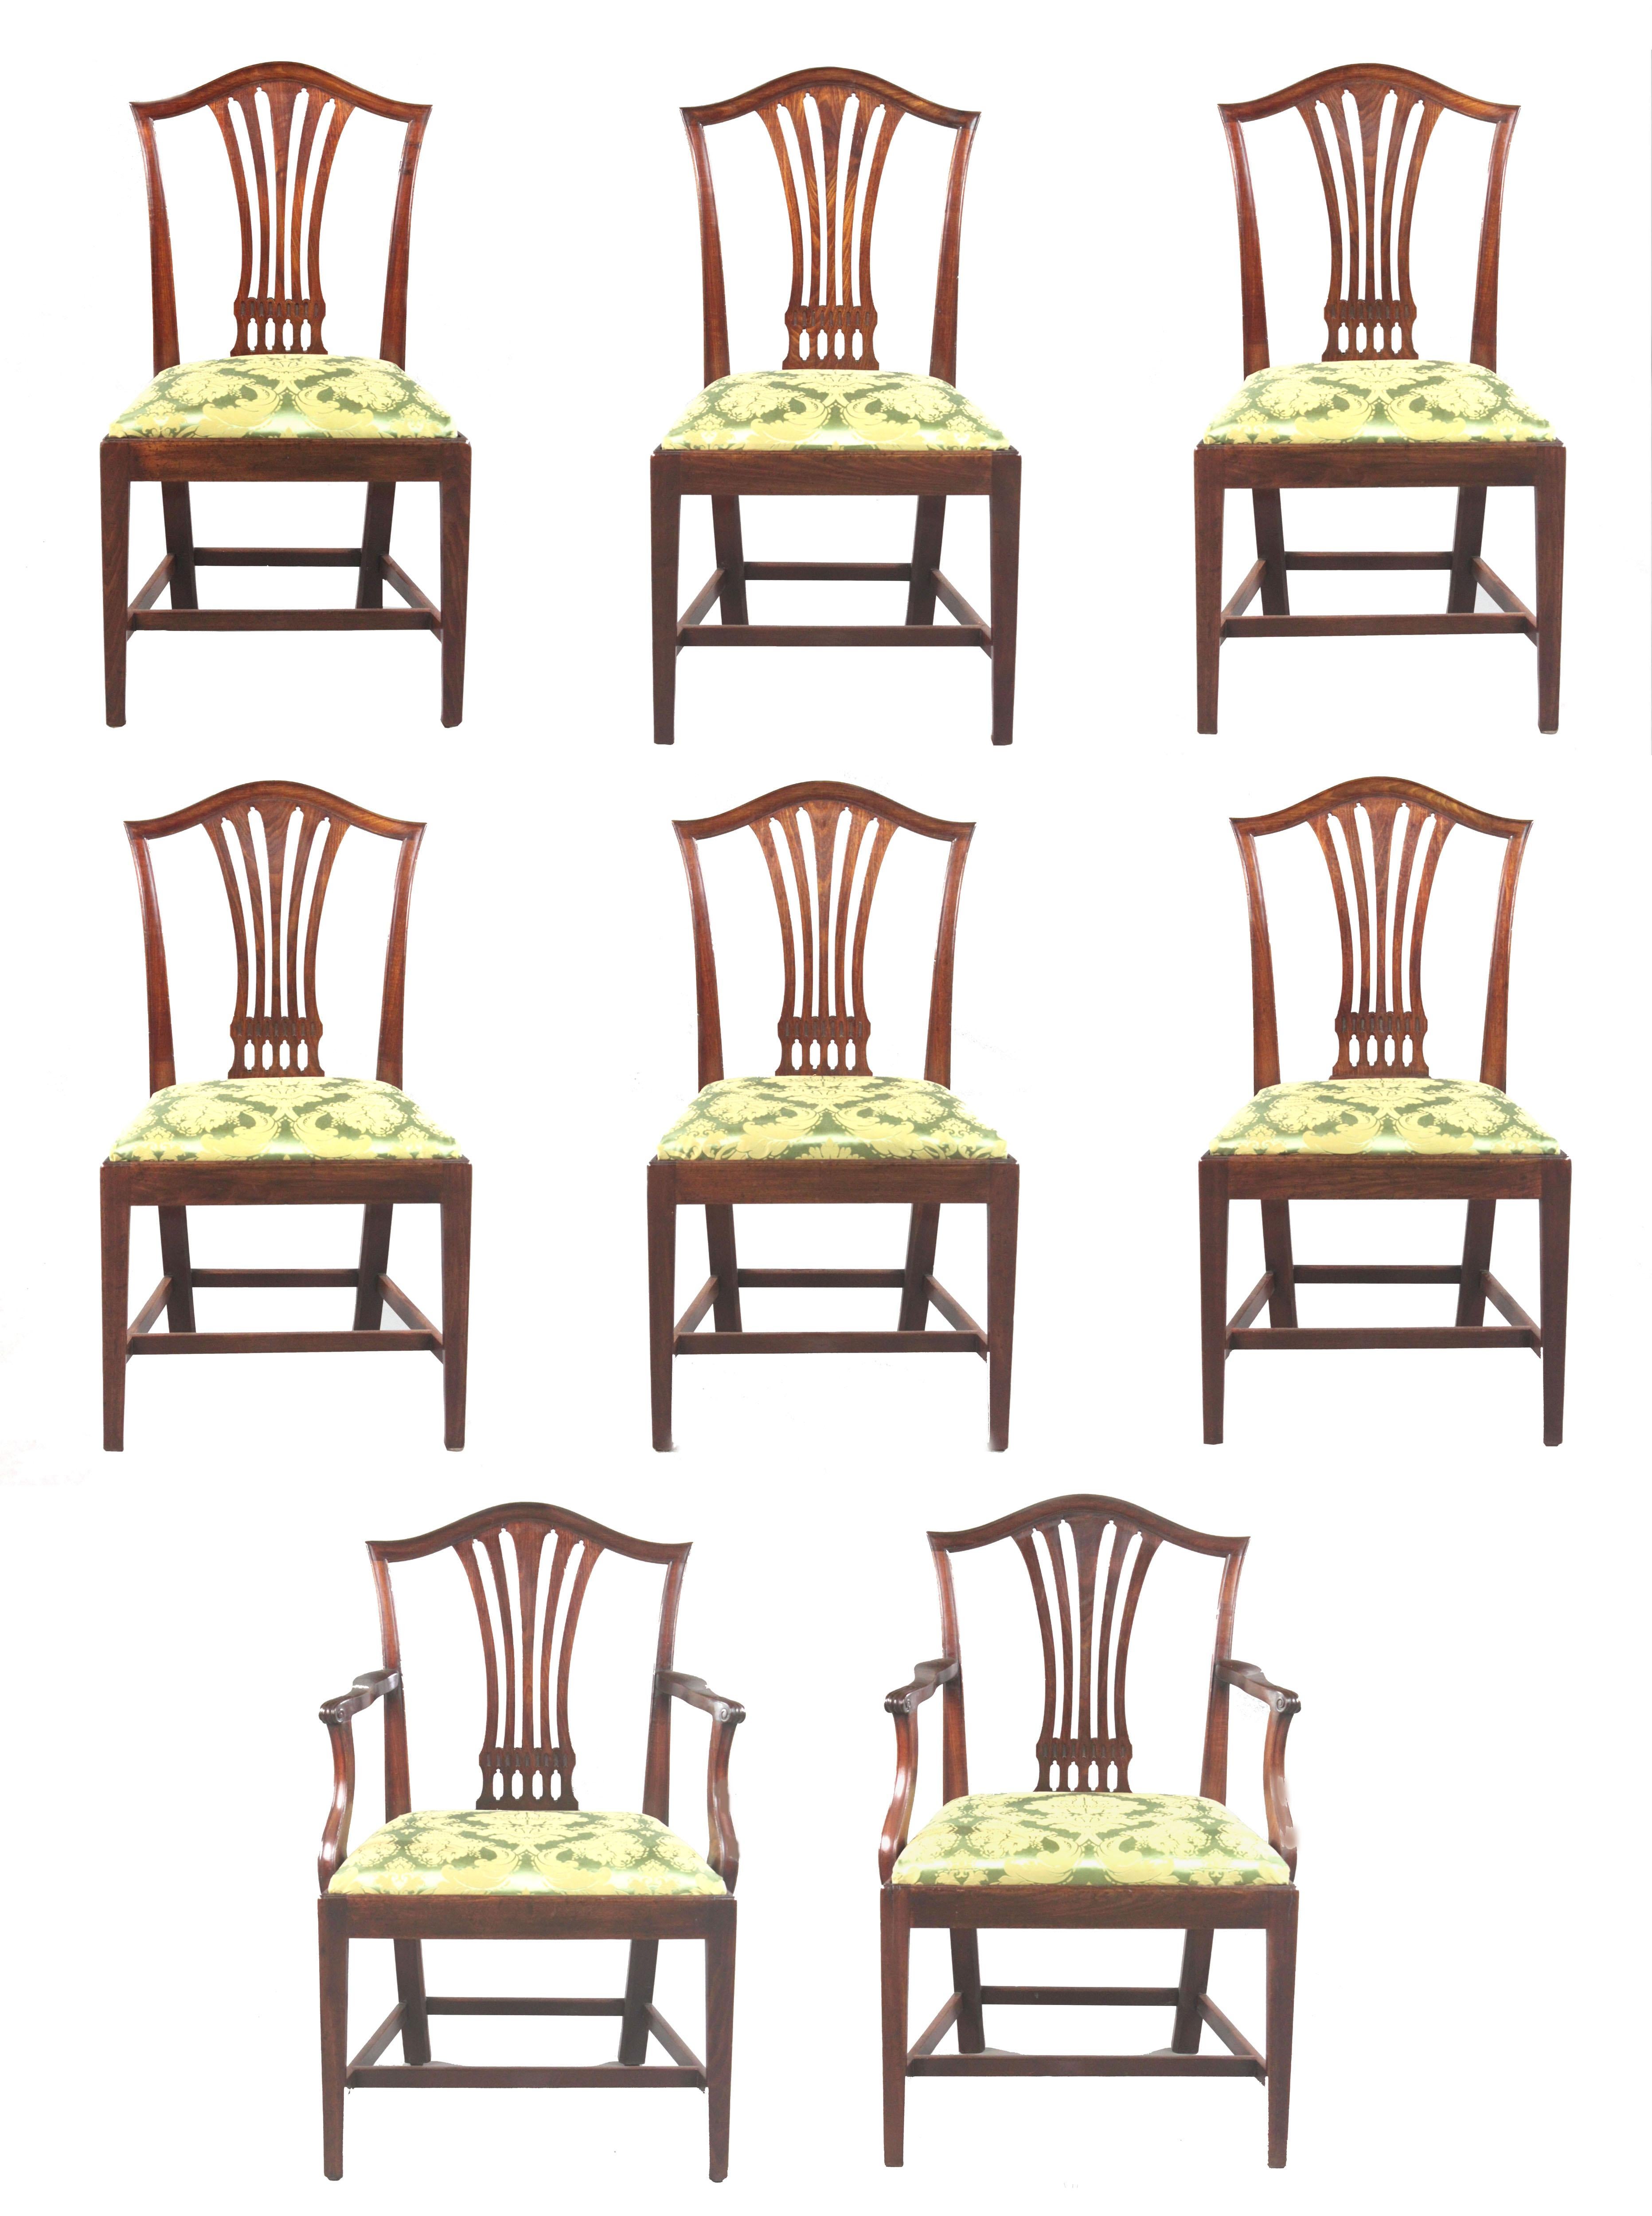 A set of 8 George III Sheraton period dining chairs, two carvers and six singles in figured mahogany of a good nut brown colour and in good condition. The camel backs with attractive pierced splats, square tapered legs united by H-stretchers. The